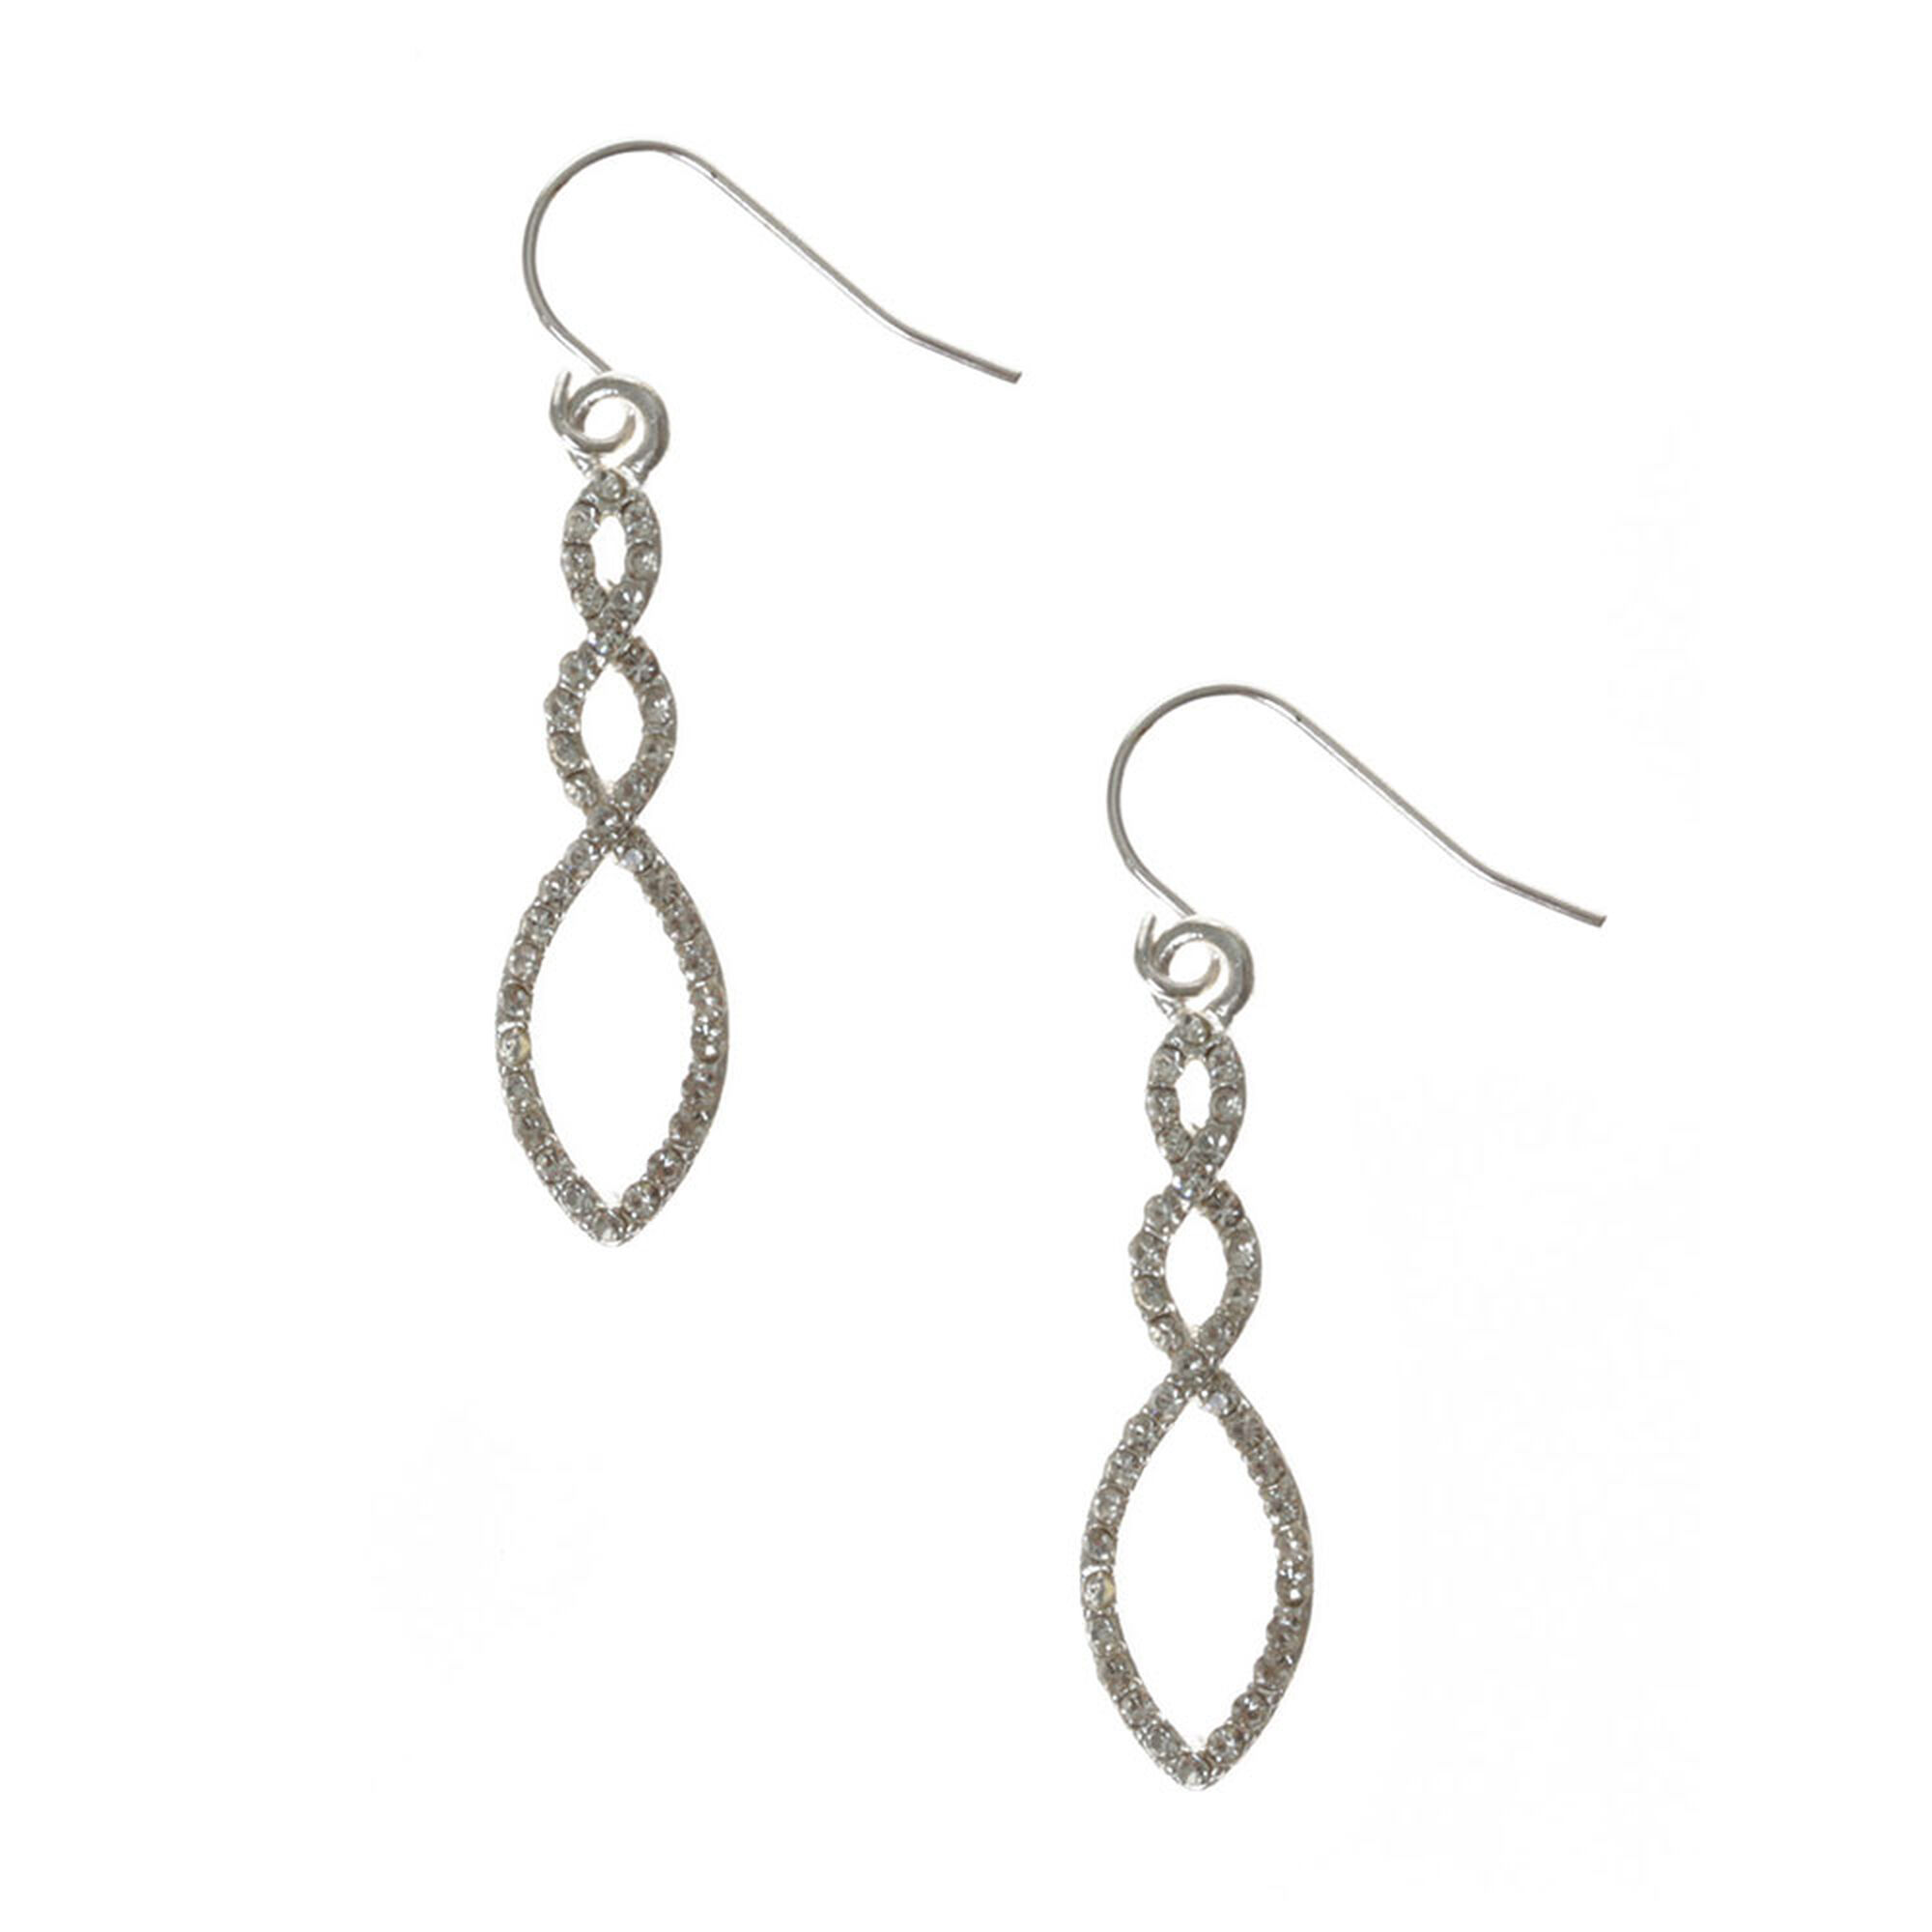 View Claires Crystal Treble Twist Drop Earrings information